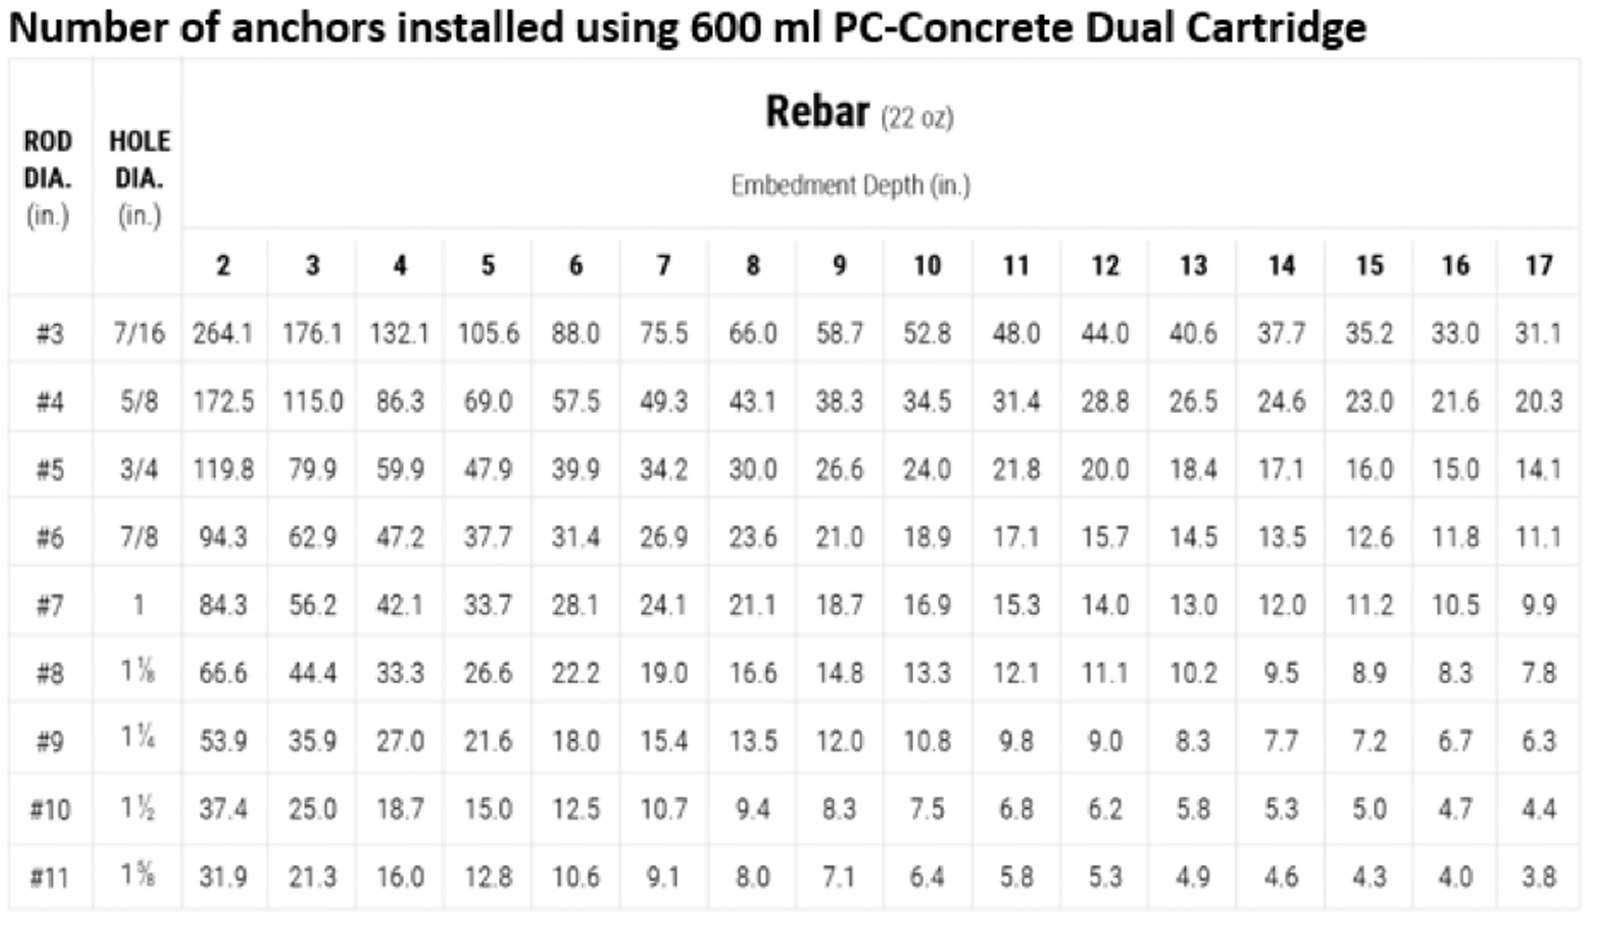 PC Concrete - Number of Anchors Installed Using 600ml PC-Concrete Dual Cartridge